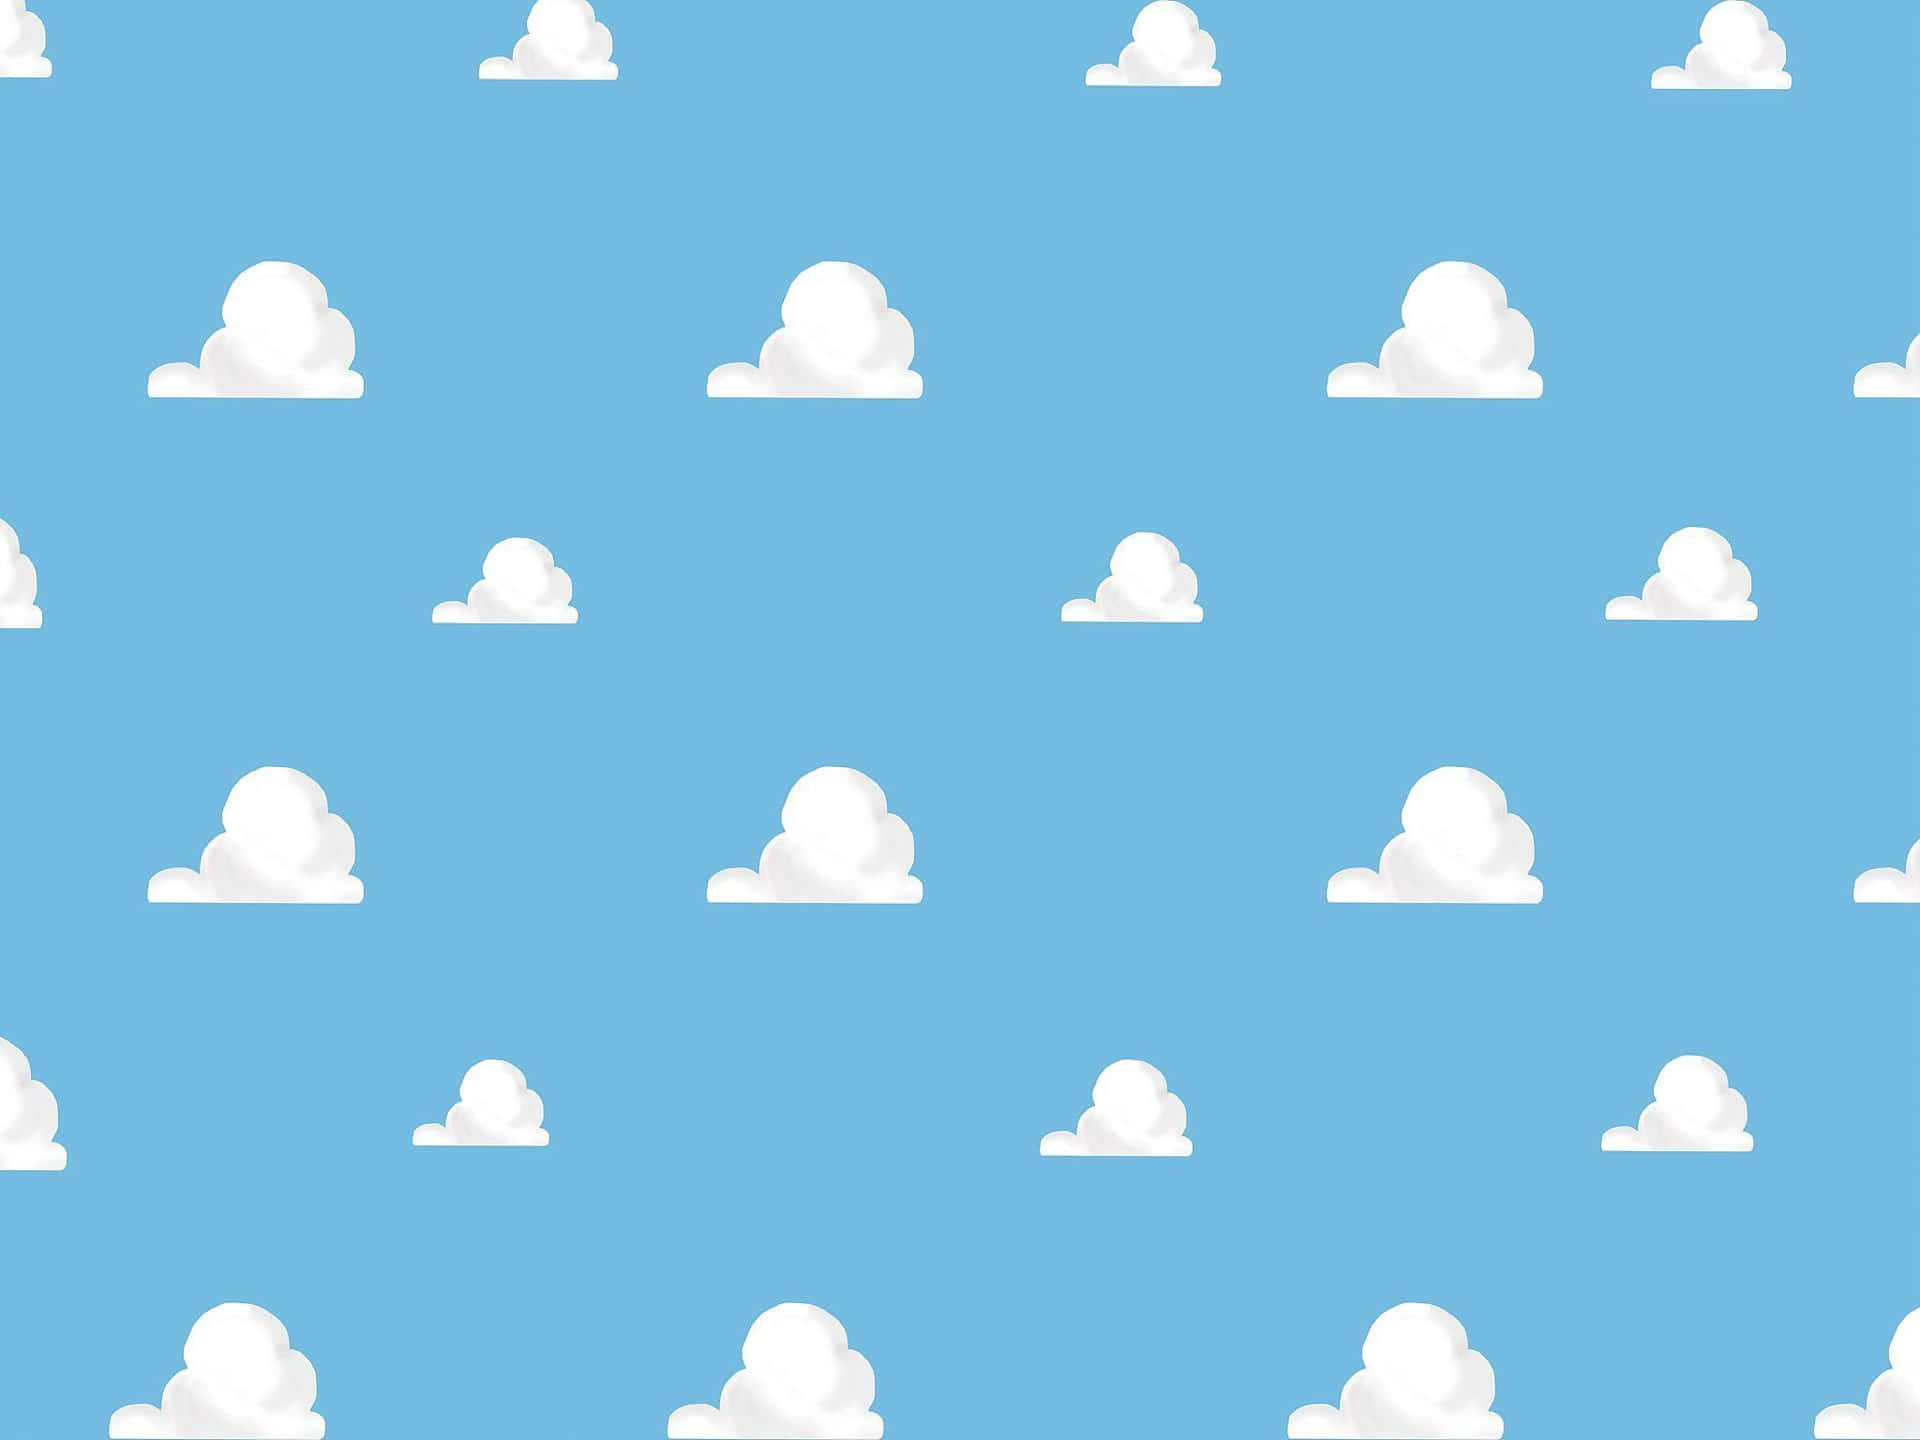 Toy Story Cloud Wallpaper Background by Luxojr888 on DeviantArt